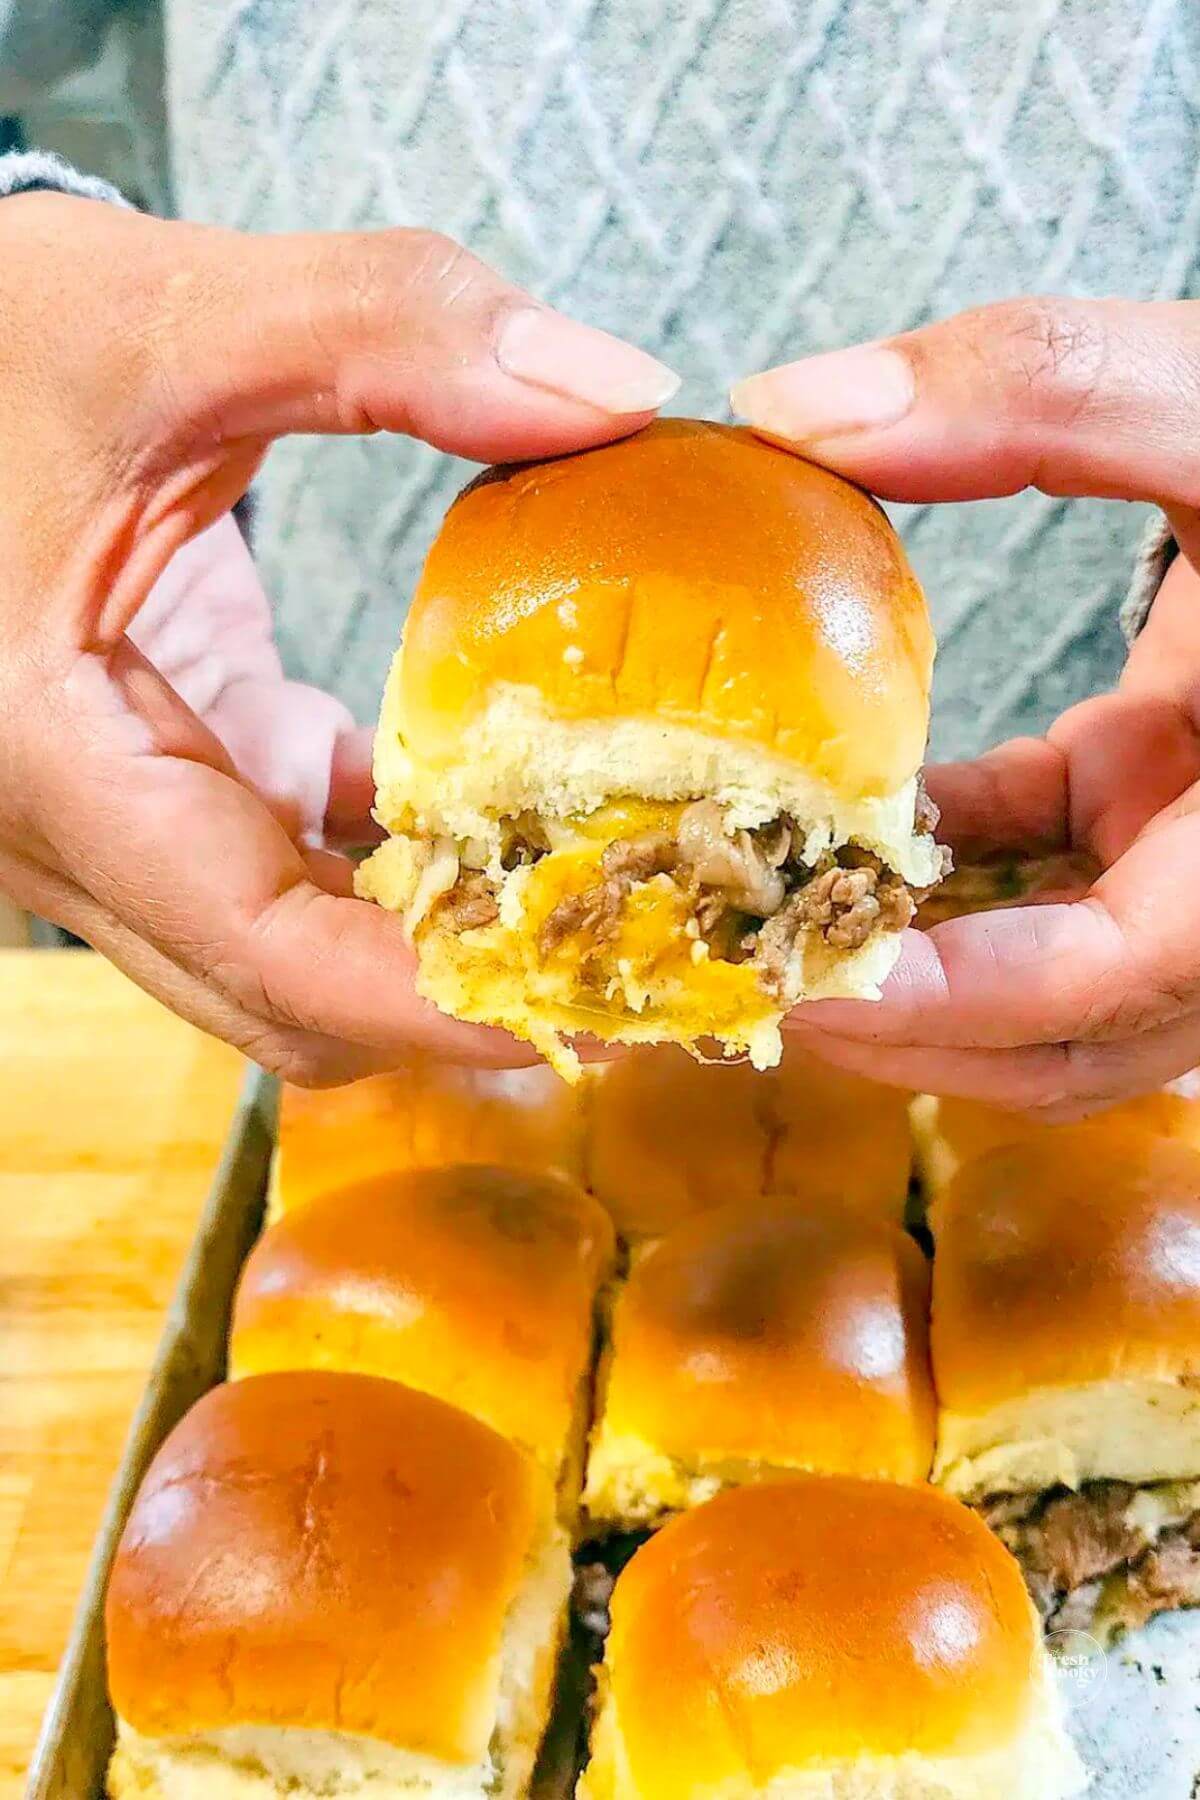 Beef and Cheddar sliders in hands ready to eat with melty cheese.